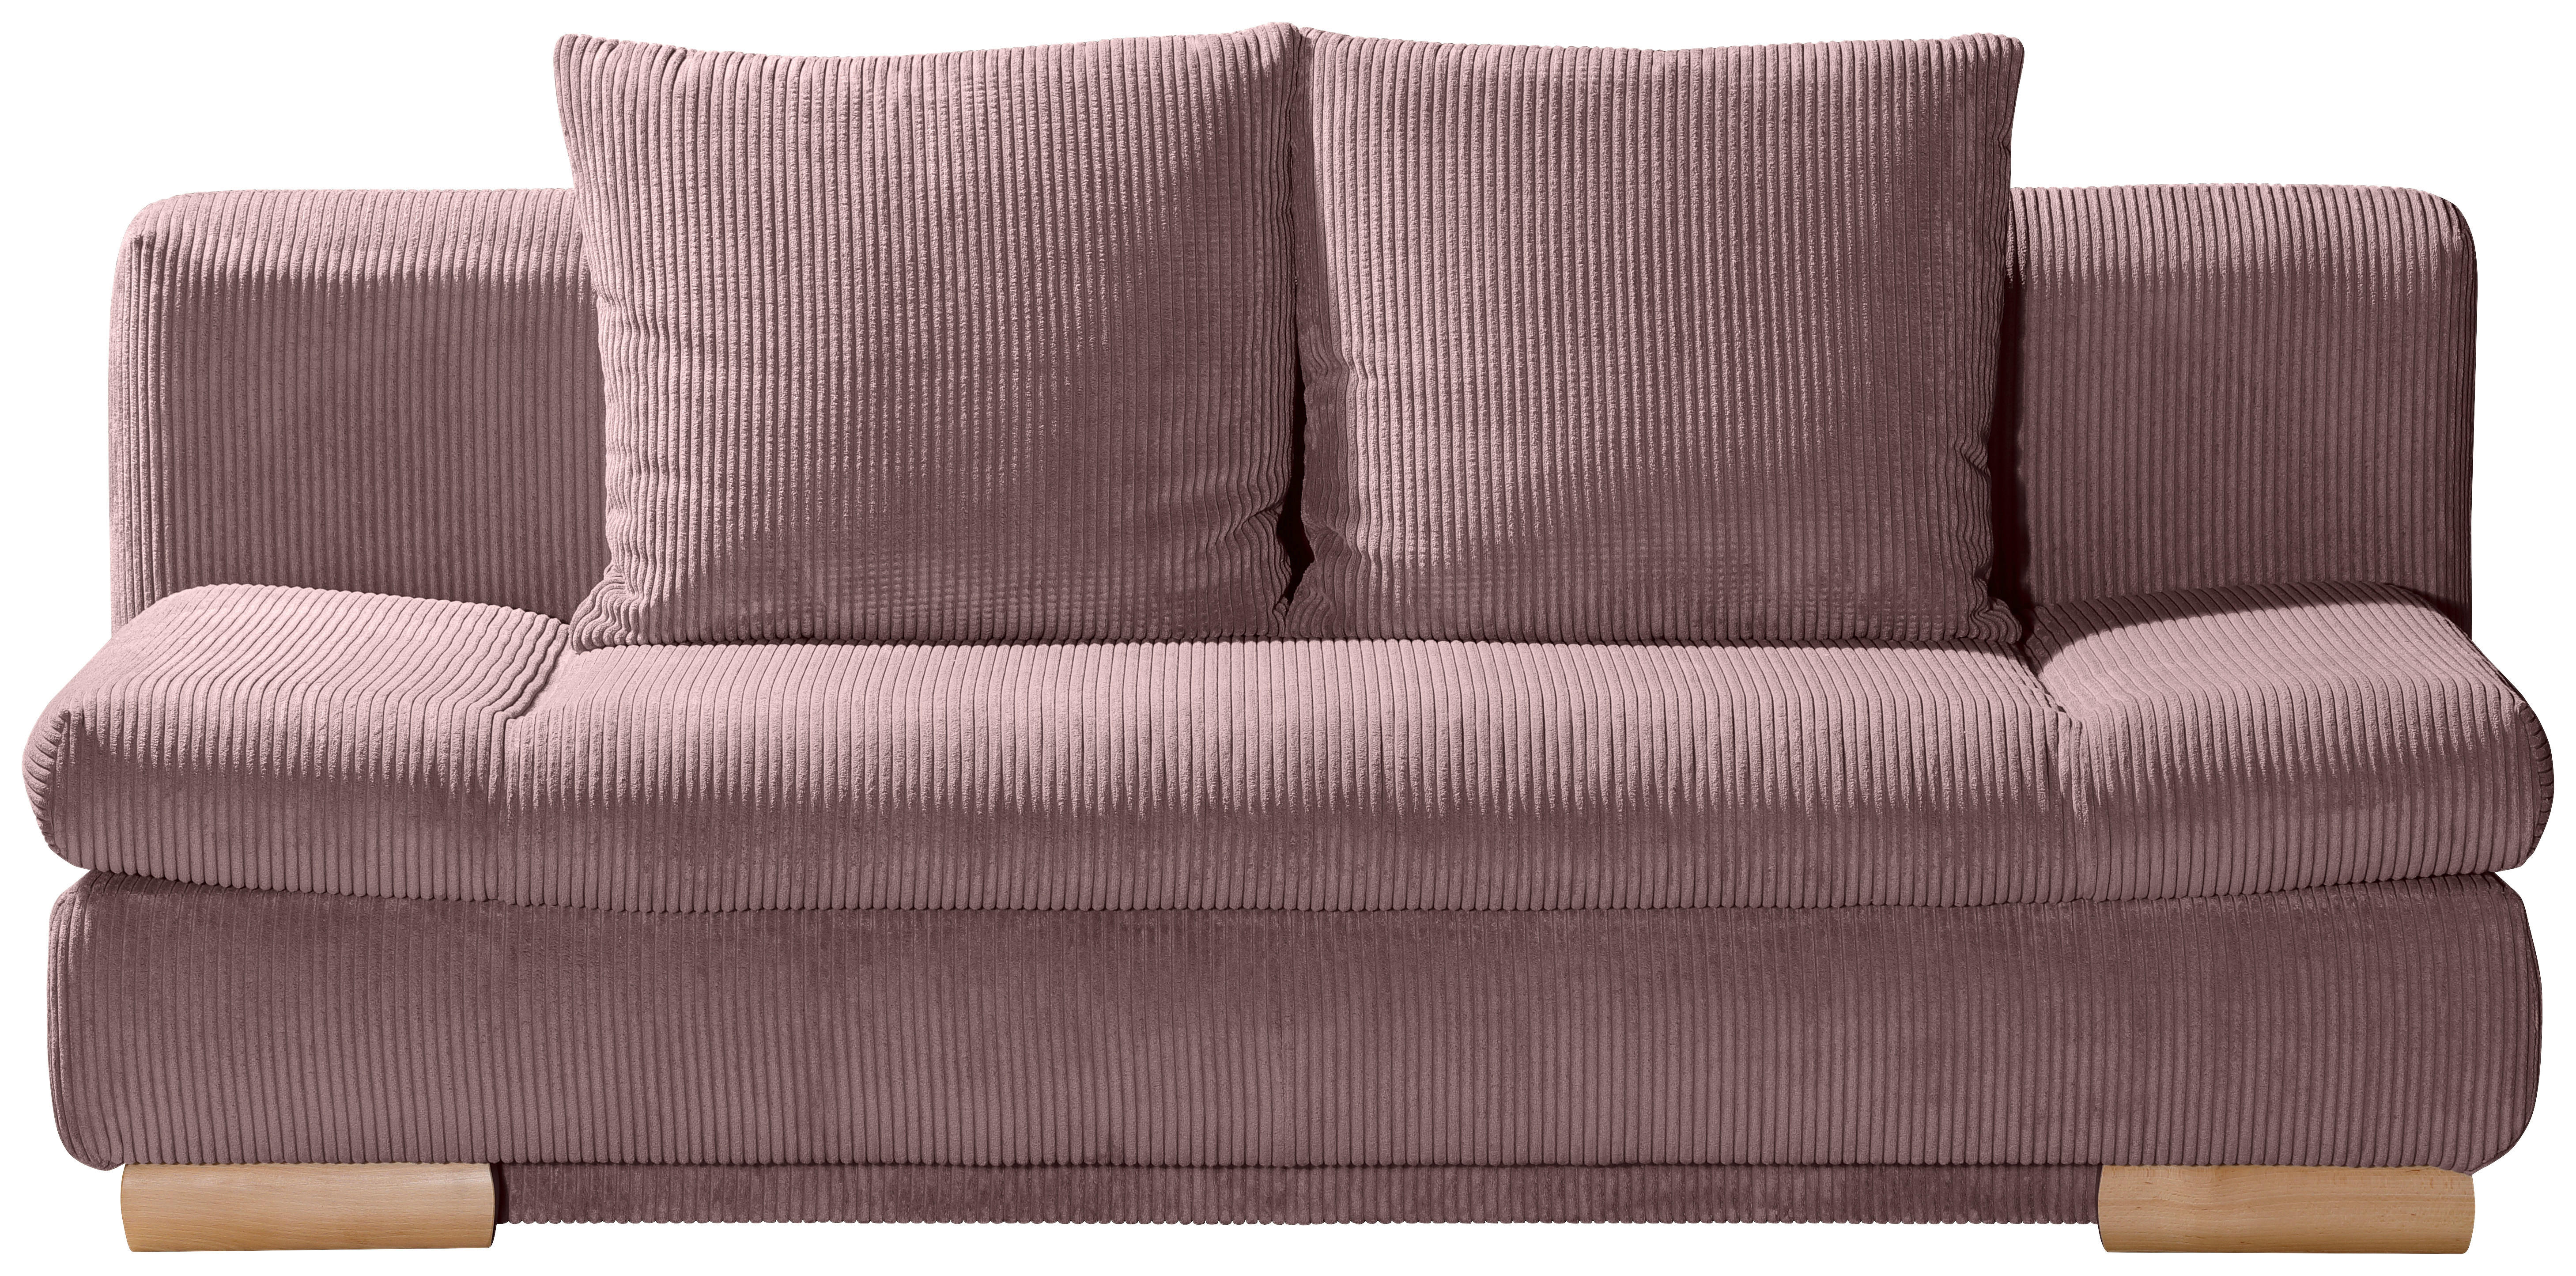 SCHLAFSOFA in Cord Rosa  - Rosa, Konventionell, Textil (200/87/93cm) - Novel